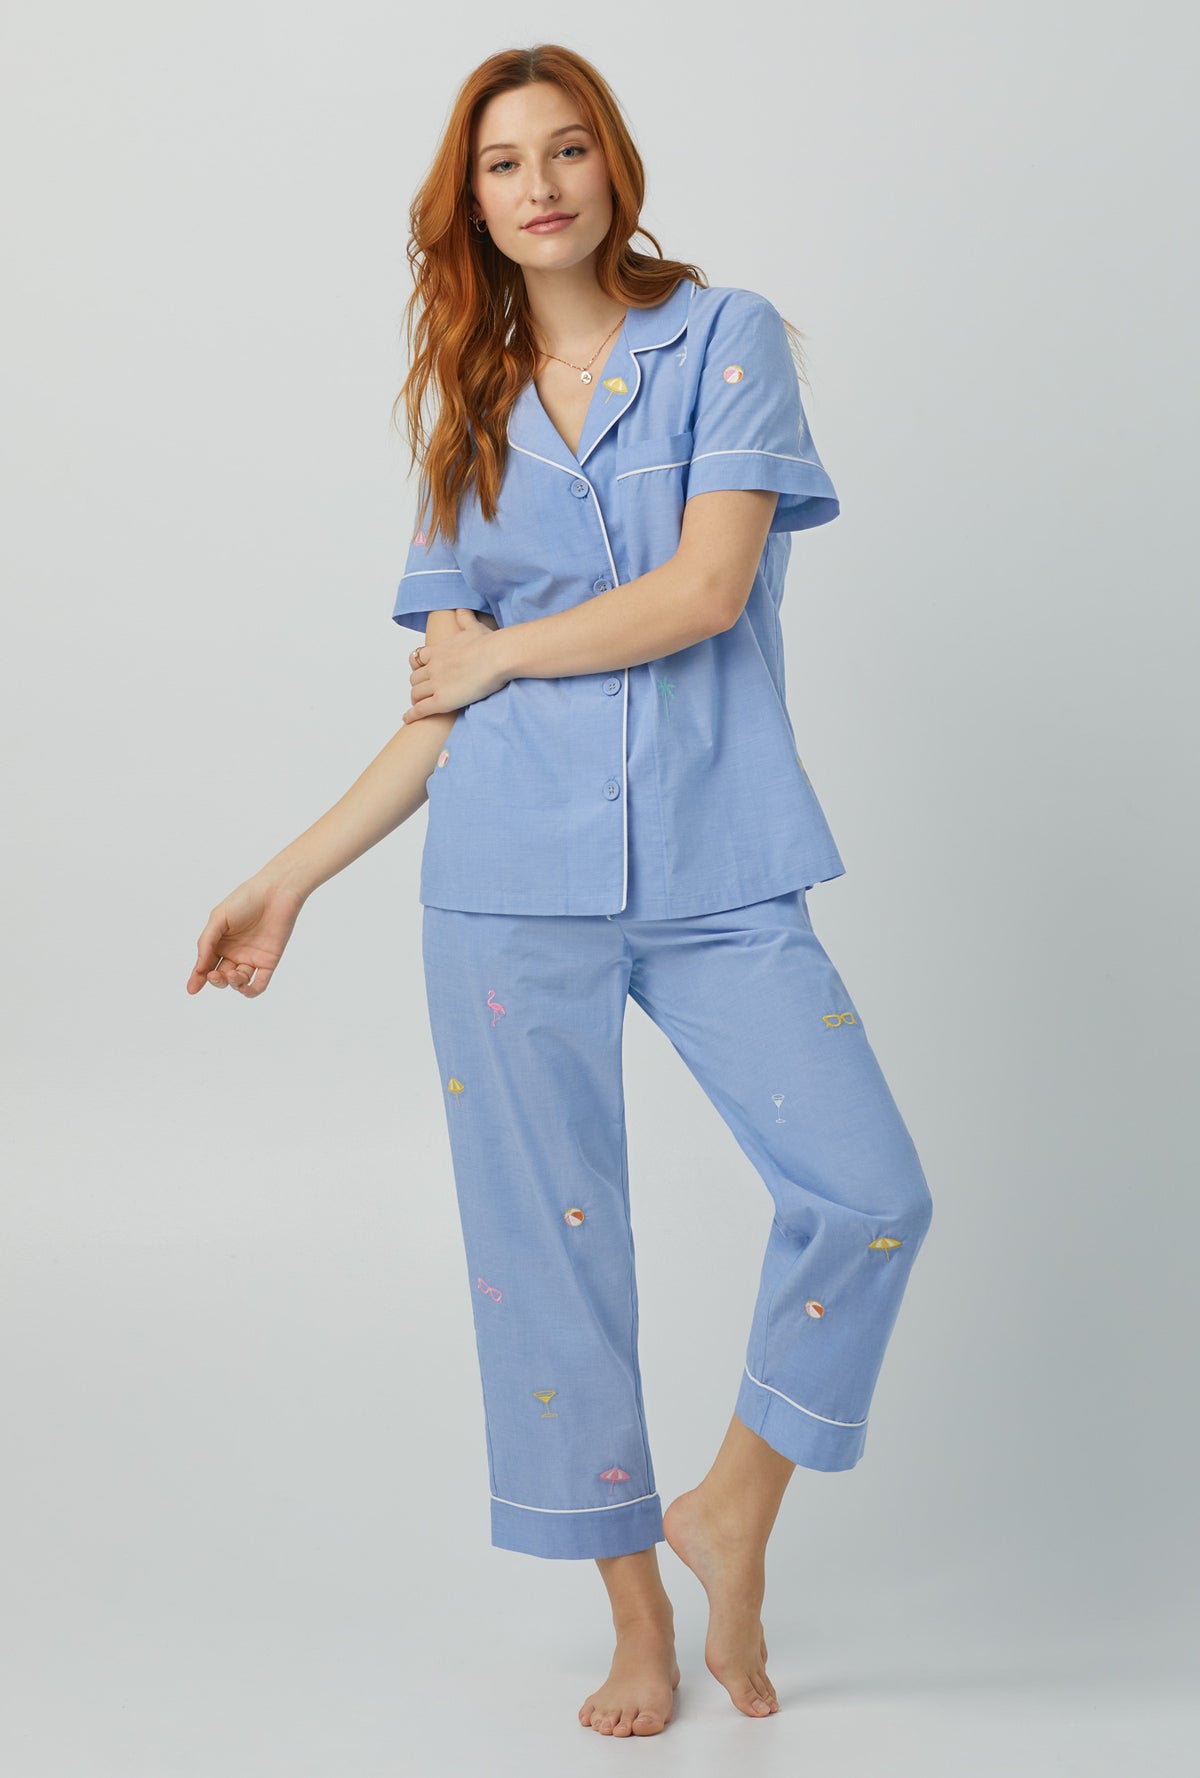 A lady wearing blue Short Sleeve Classic Woven Cotton Poplin Cropped PJ Set with Chambray print